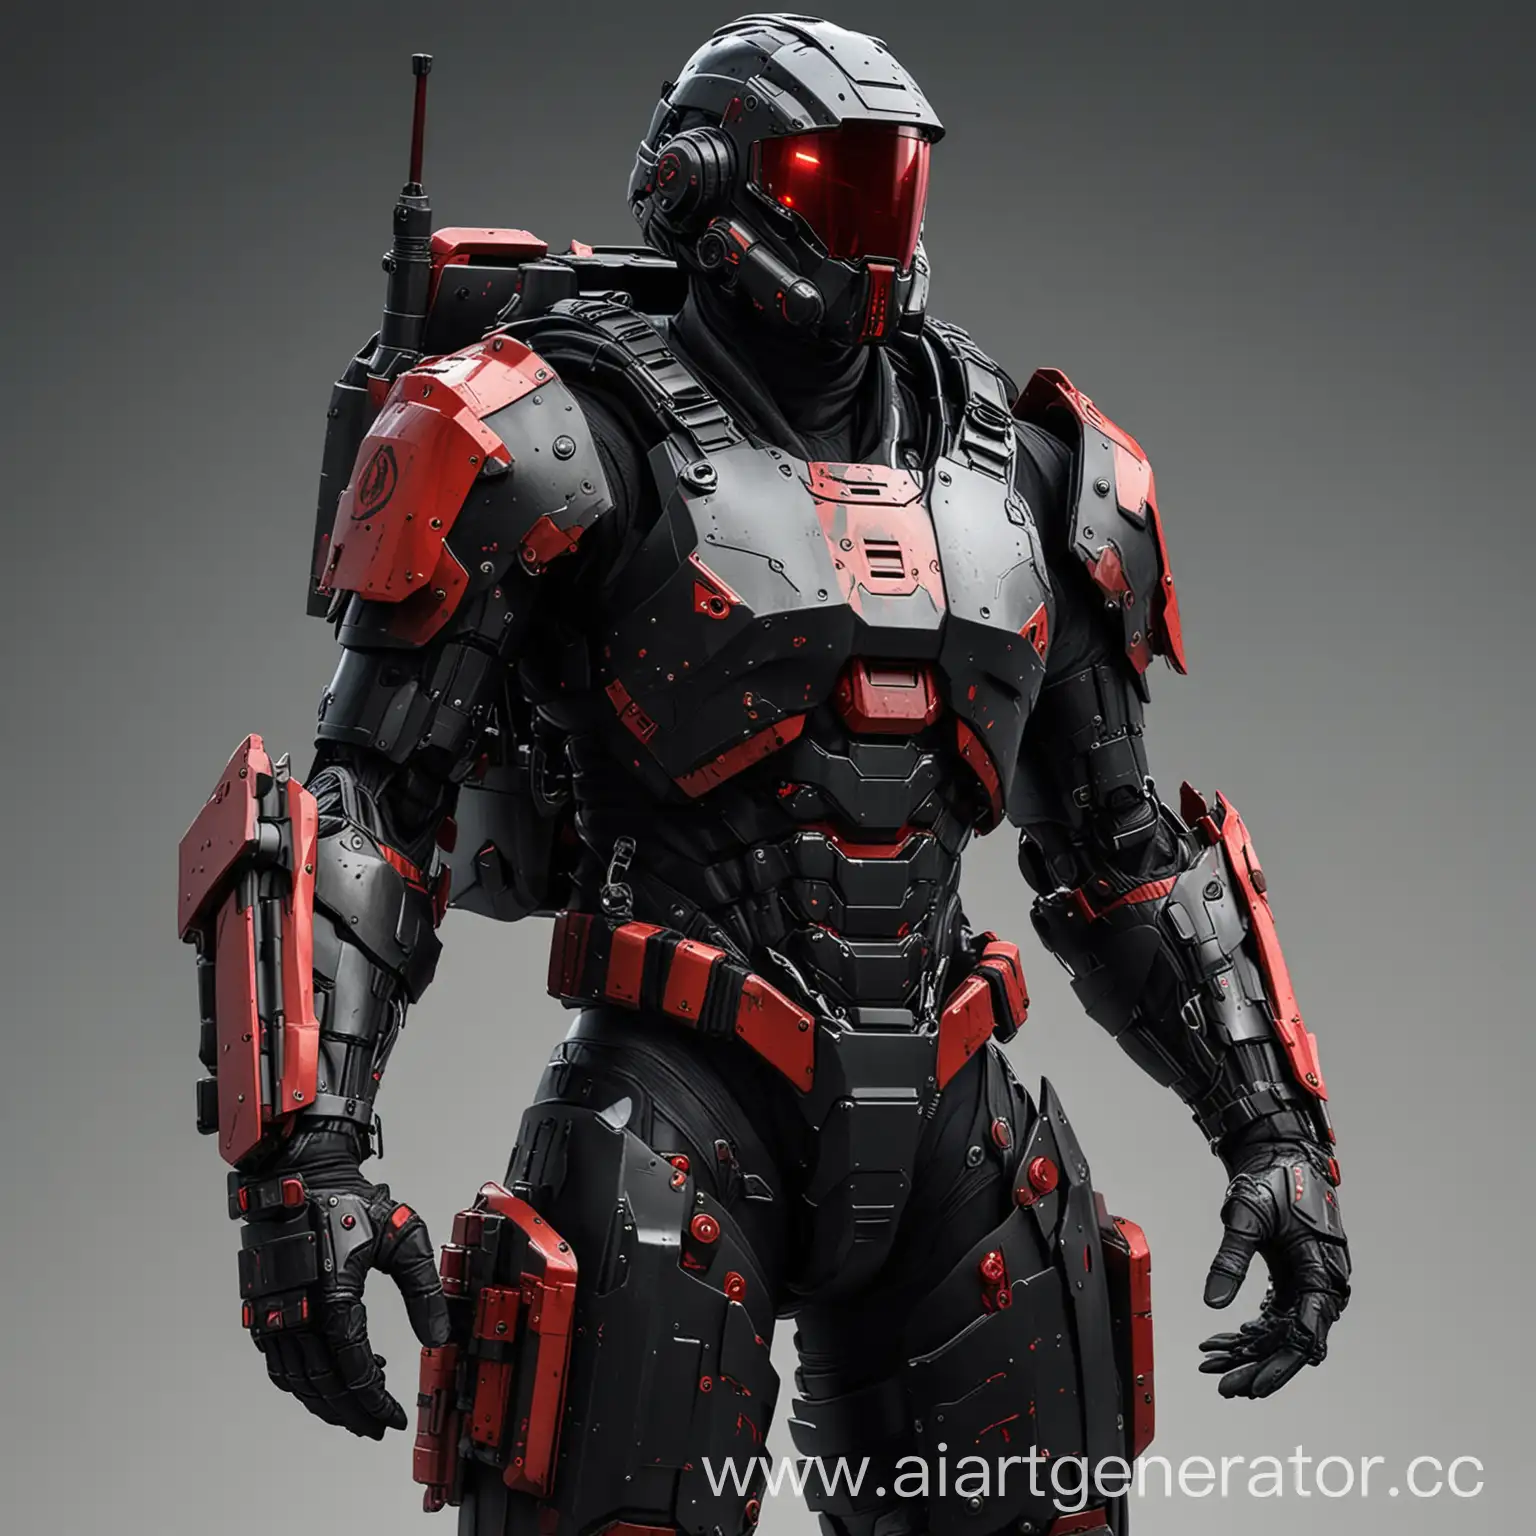 SciFi-Soldier-in-Black-Heavy-Armor-Suit-with-Red-Elements-and-Steel-Backpack